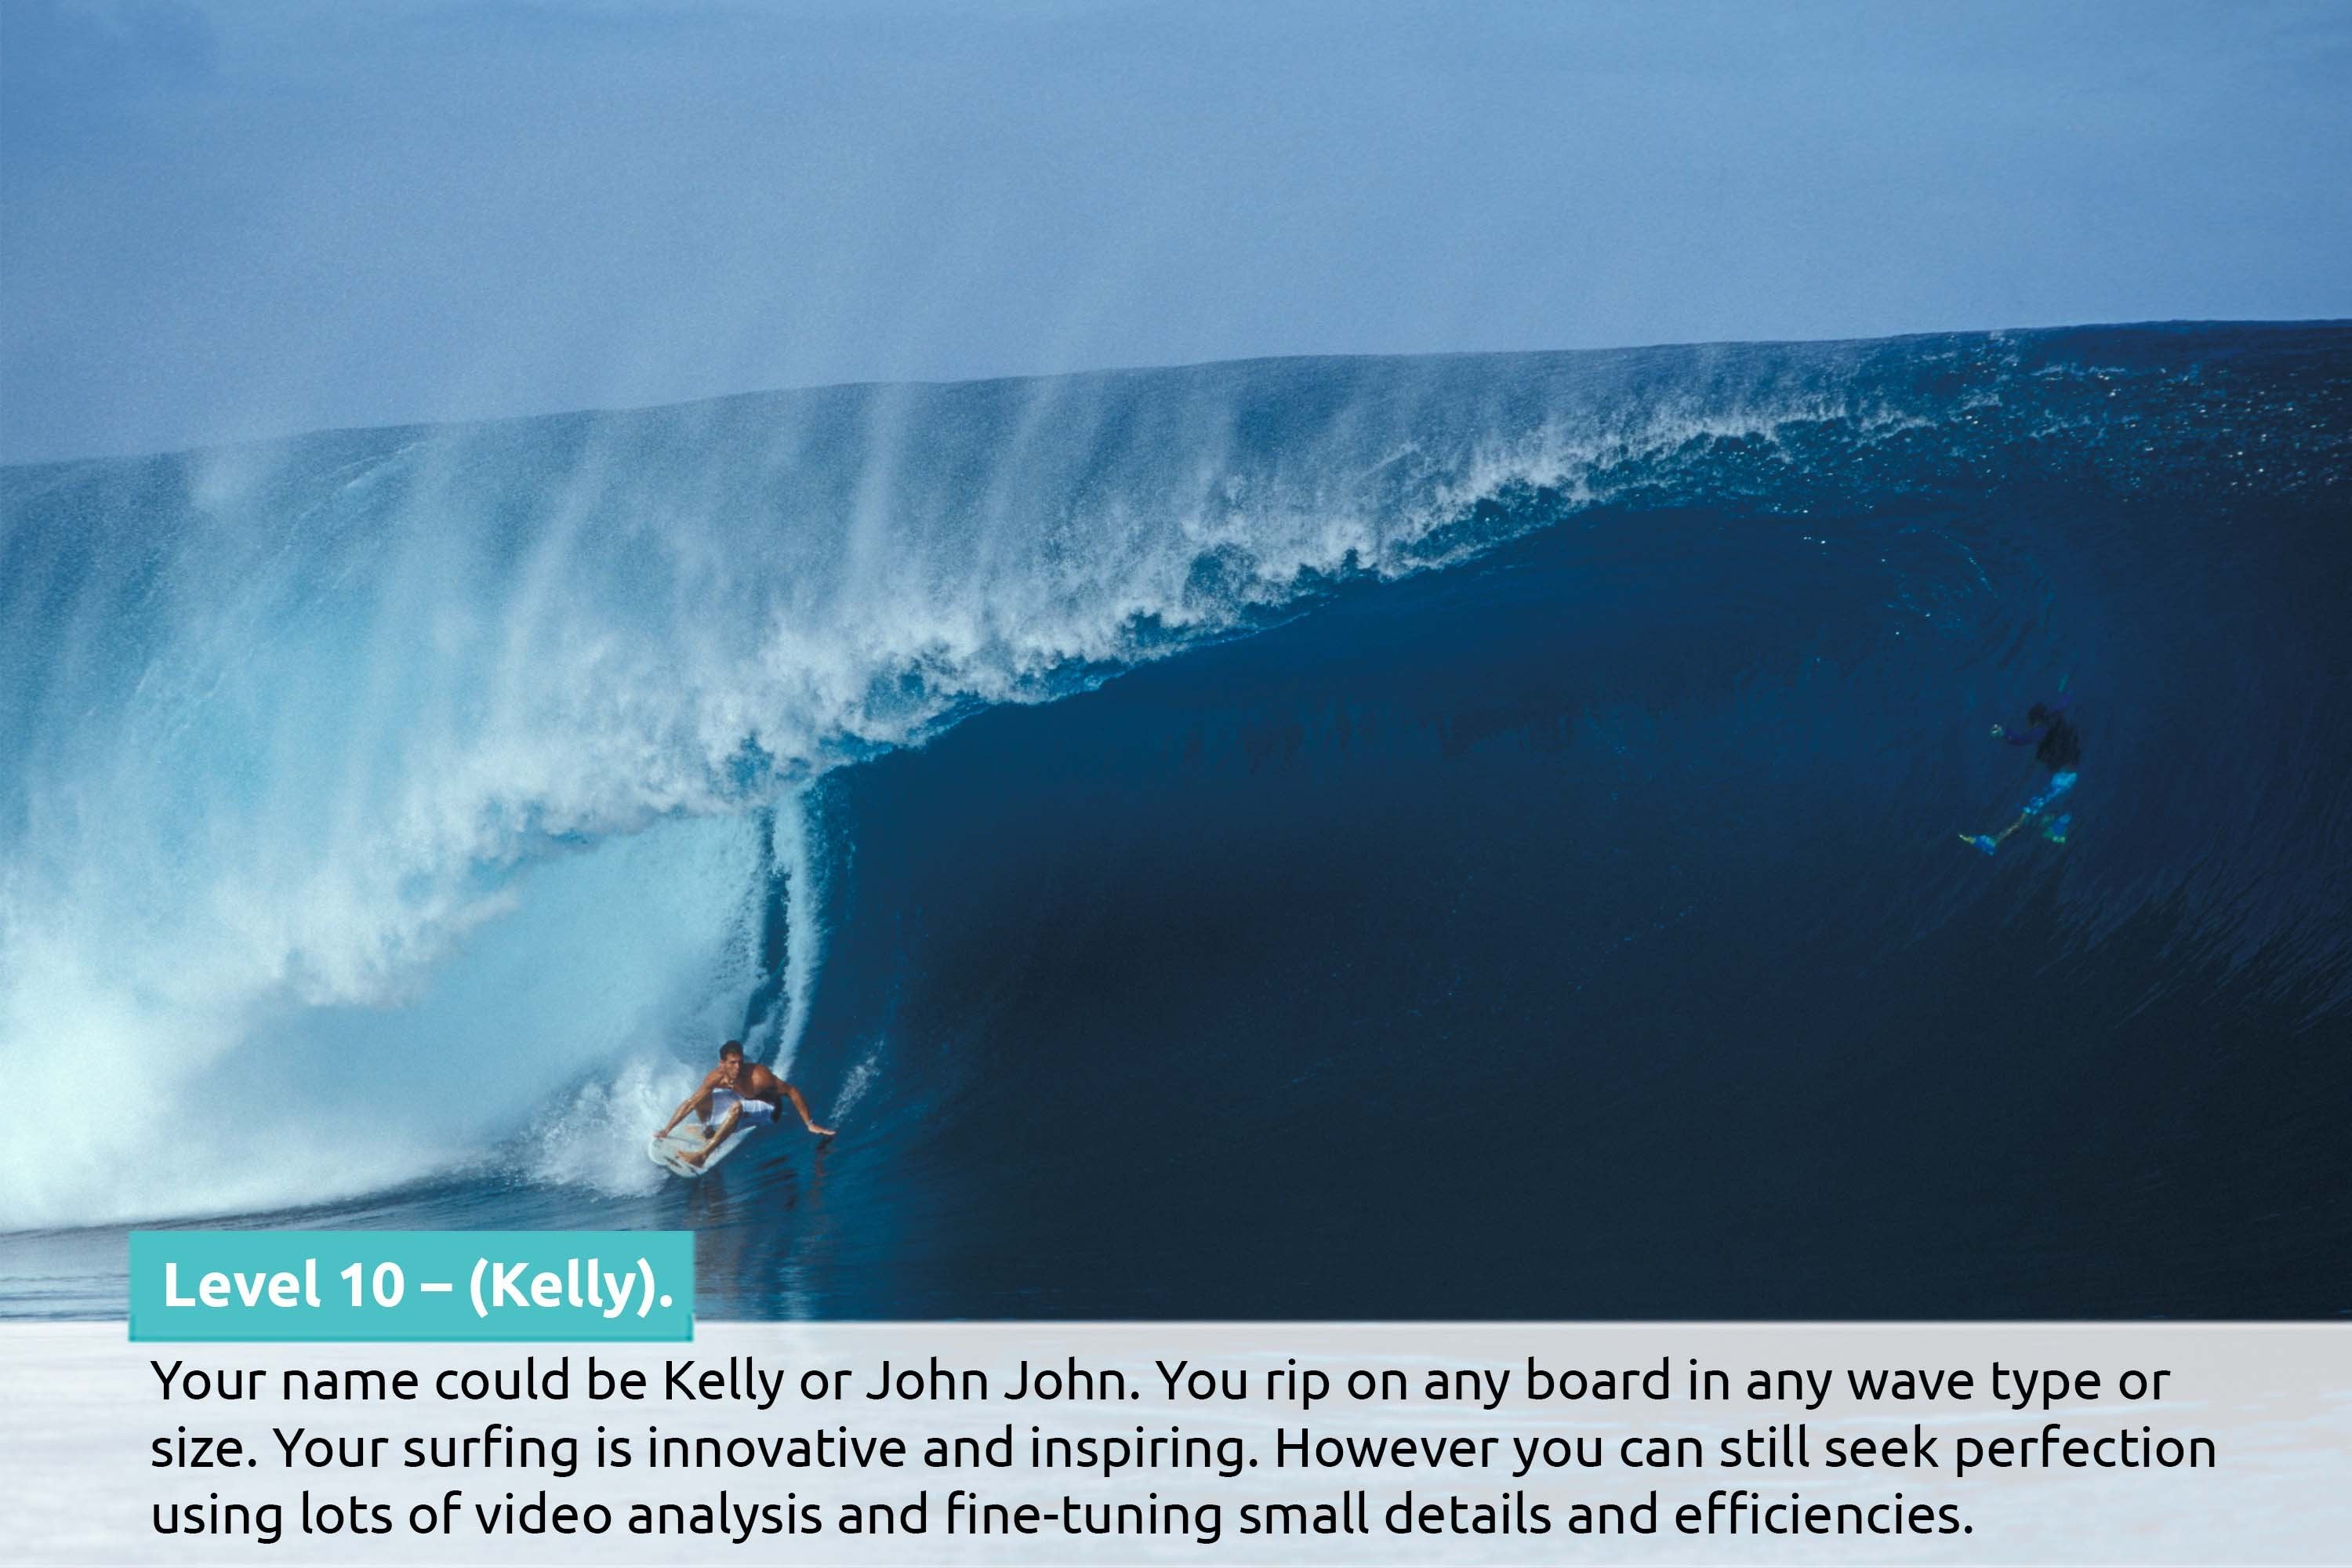 Kelly, Learn How to Surf Better